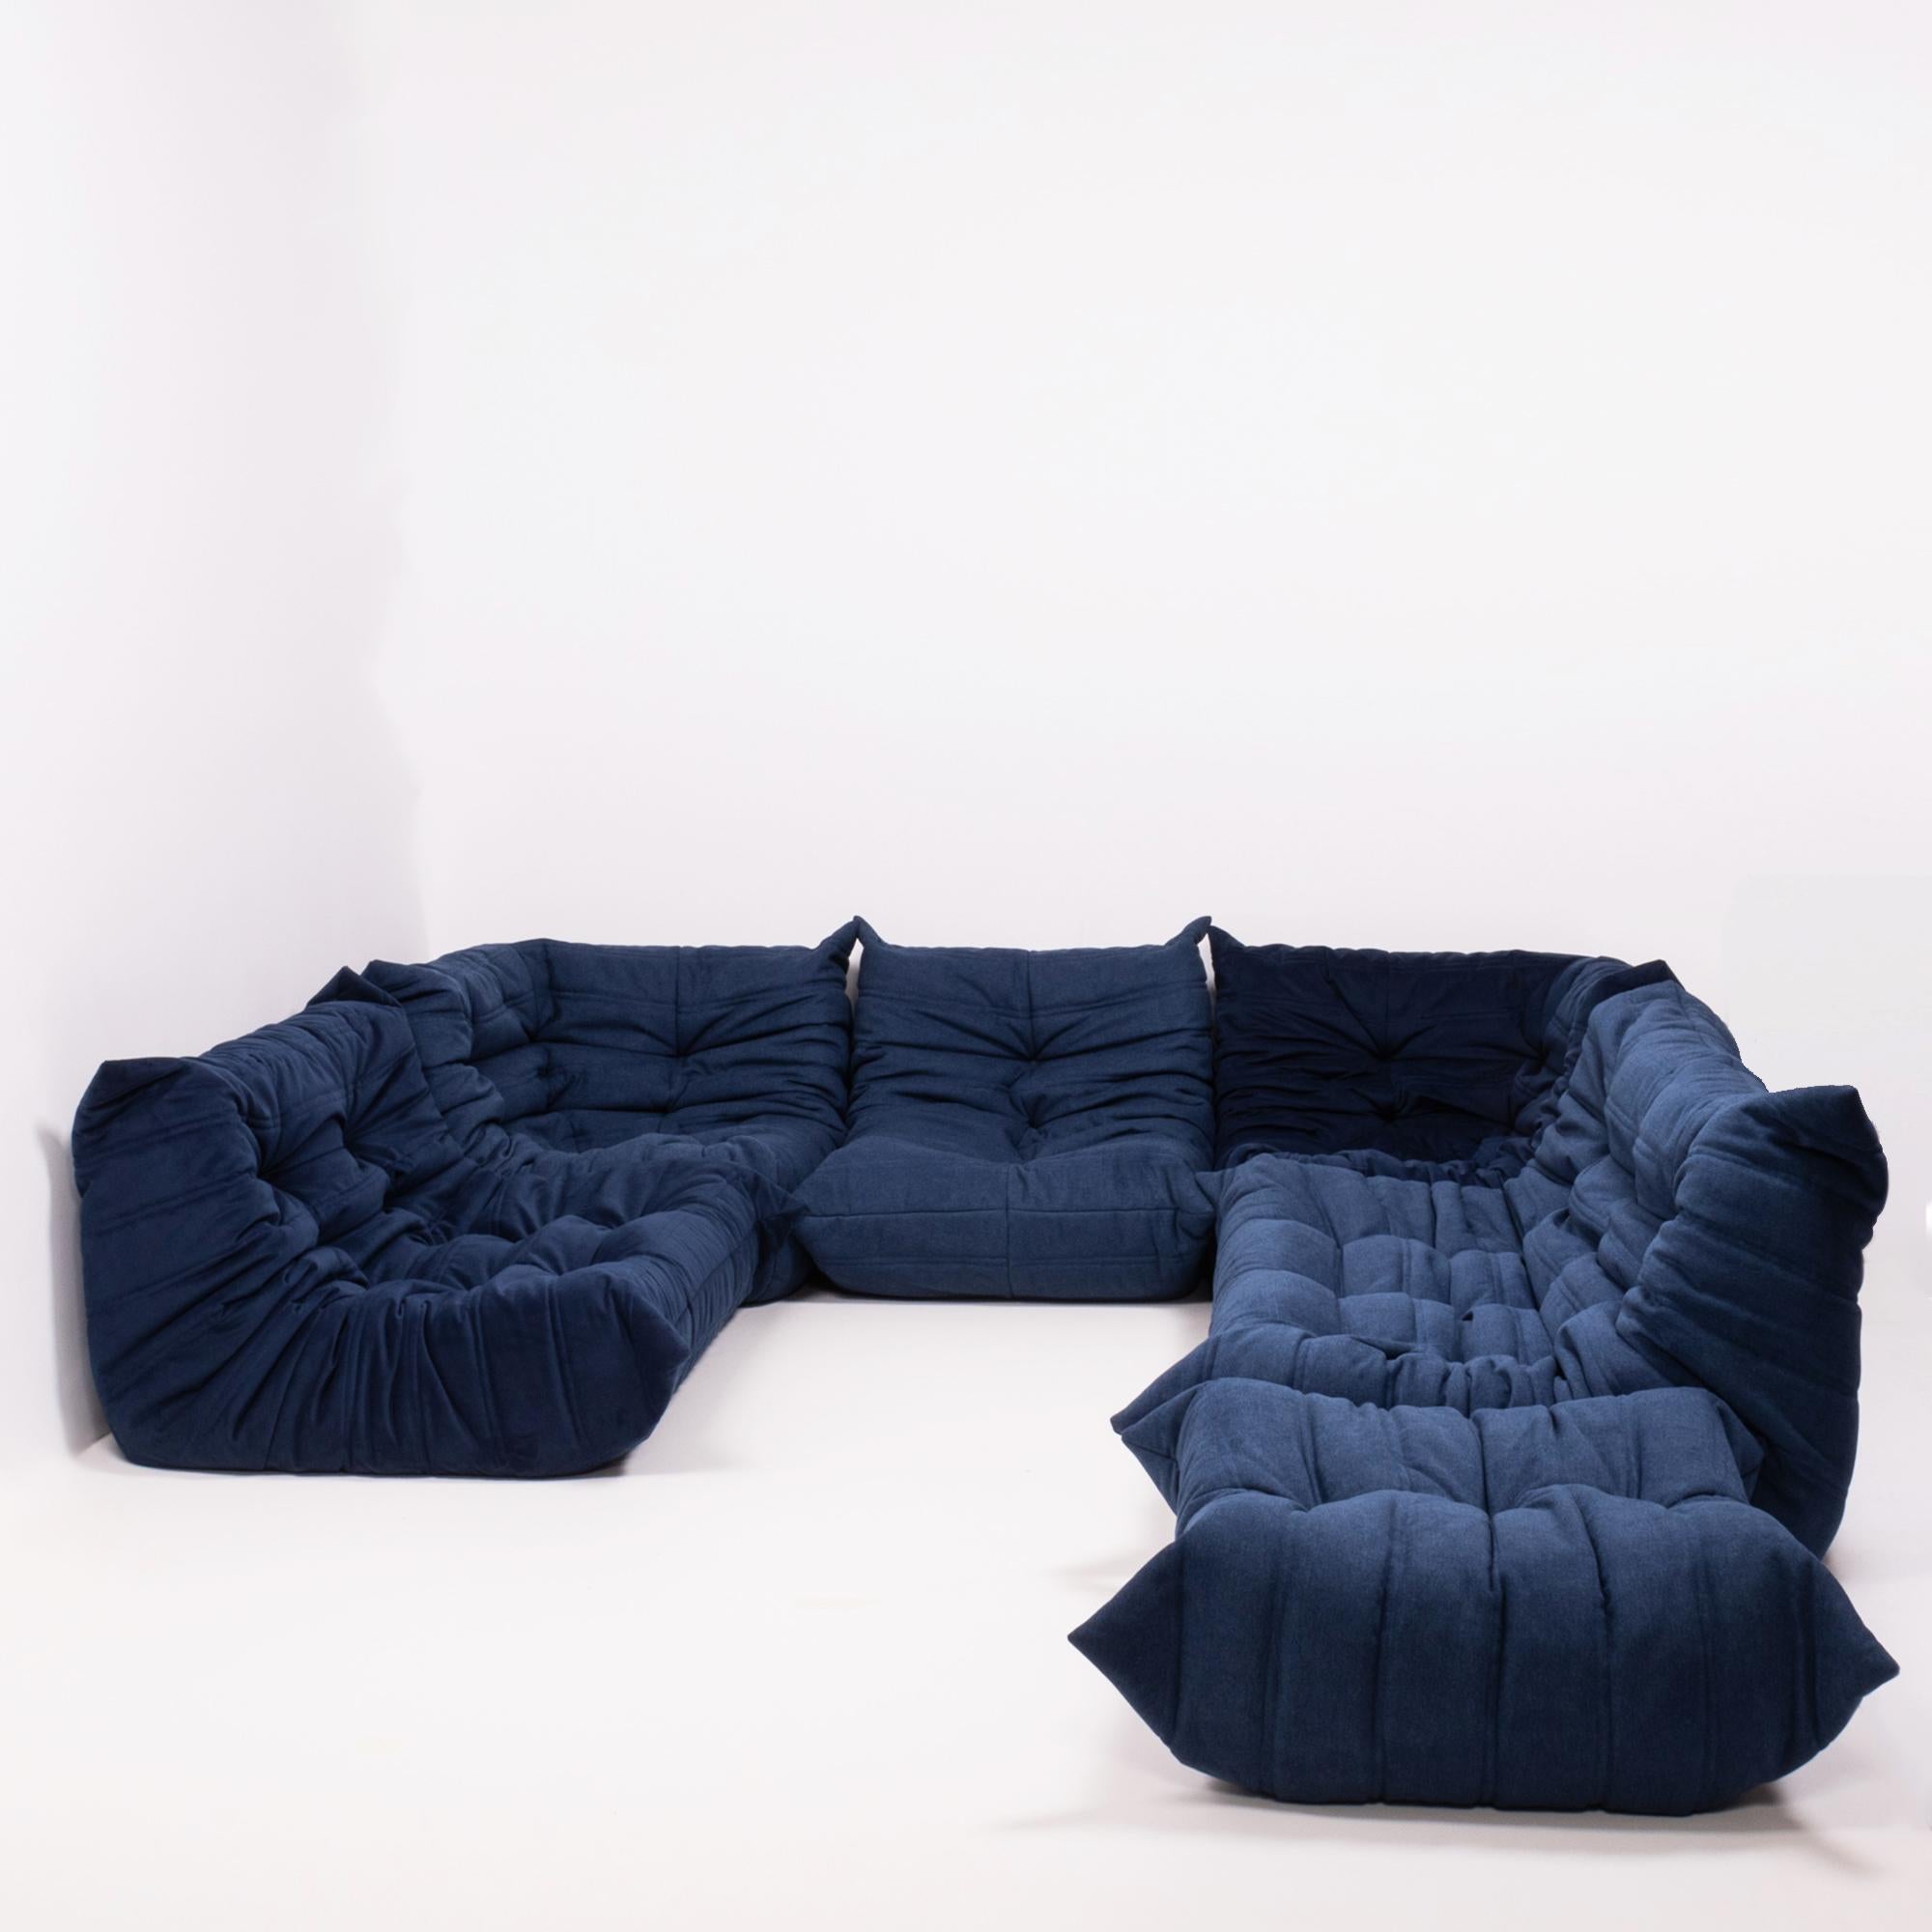 The iconic Togo sofa, originally designed by Michel Ducaroy for Ligne Roset in 1973, has become a design Classic.

This six piece modular set is incredibly versatile and can be configured into one large corner sofa or split for a multitude of